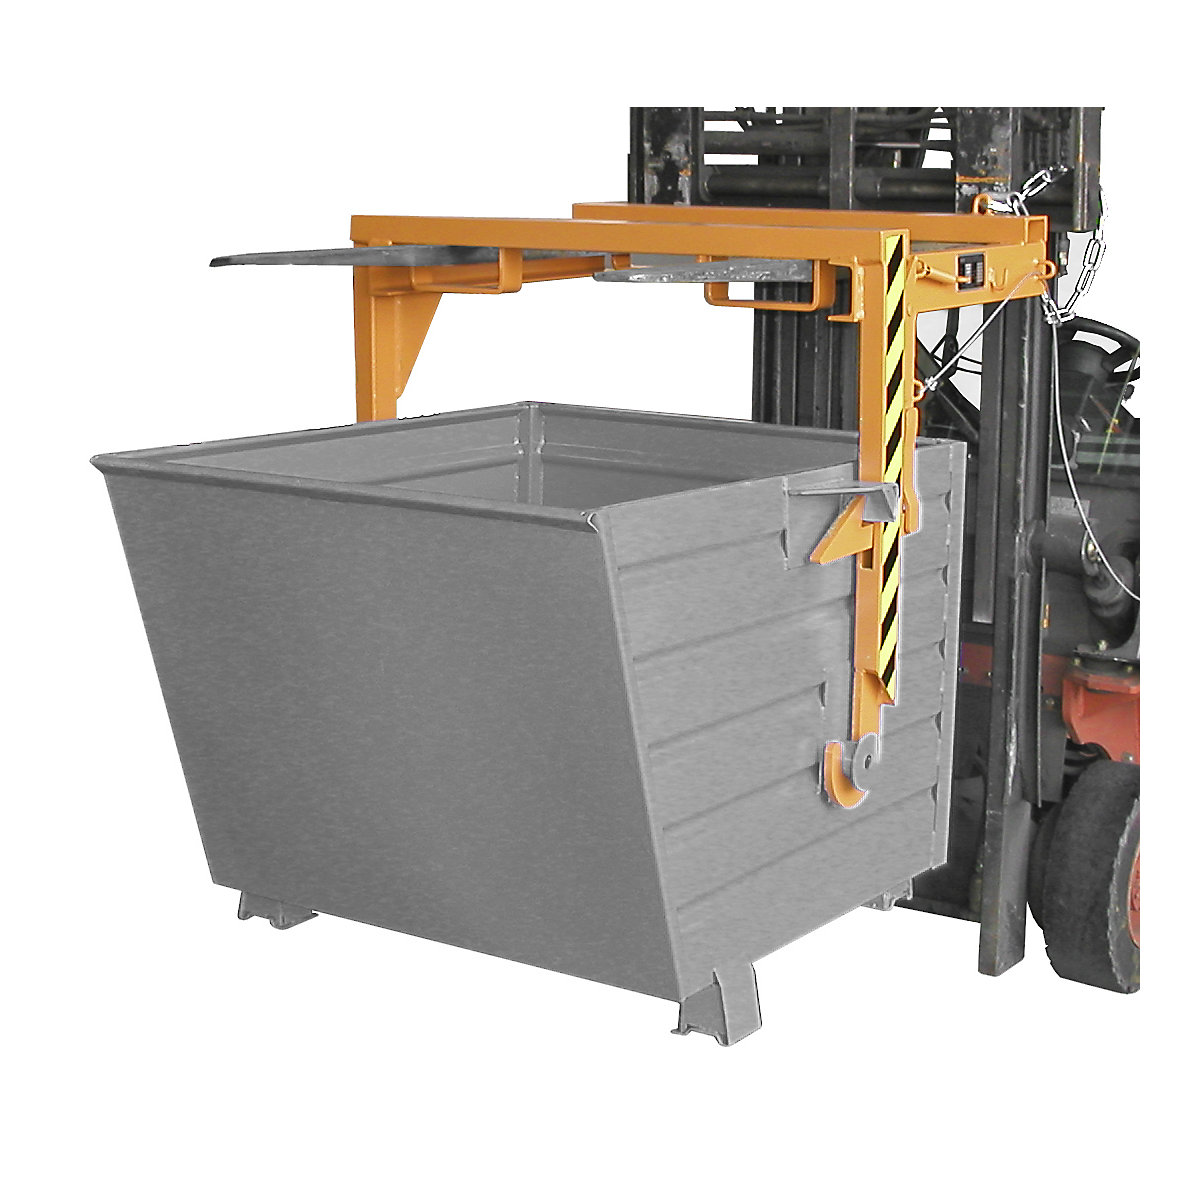 Forklift support bar for tilting skips and stacking containers – eurokraft pro, not for cranes, max. load 500 kg, for container size 0.3 m³